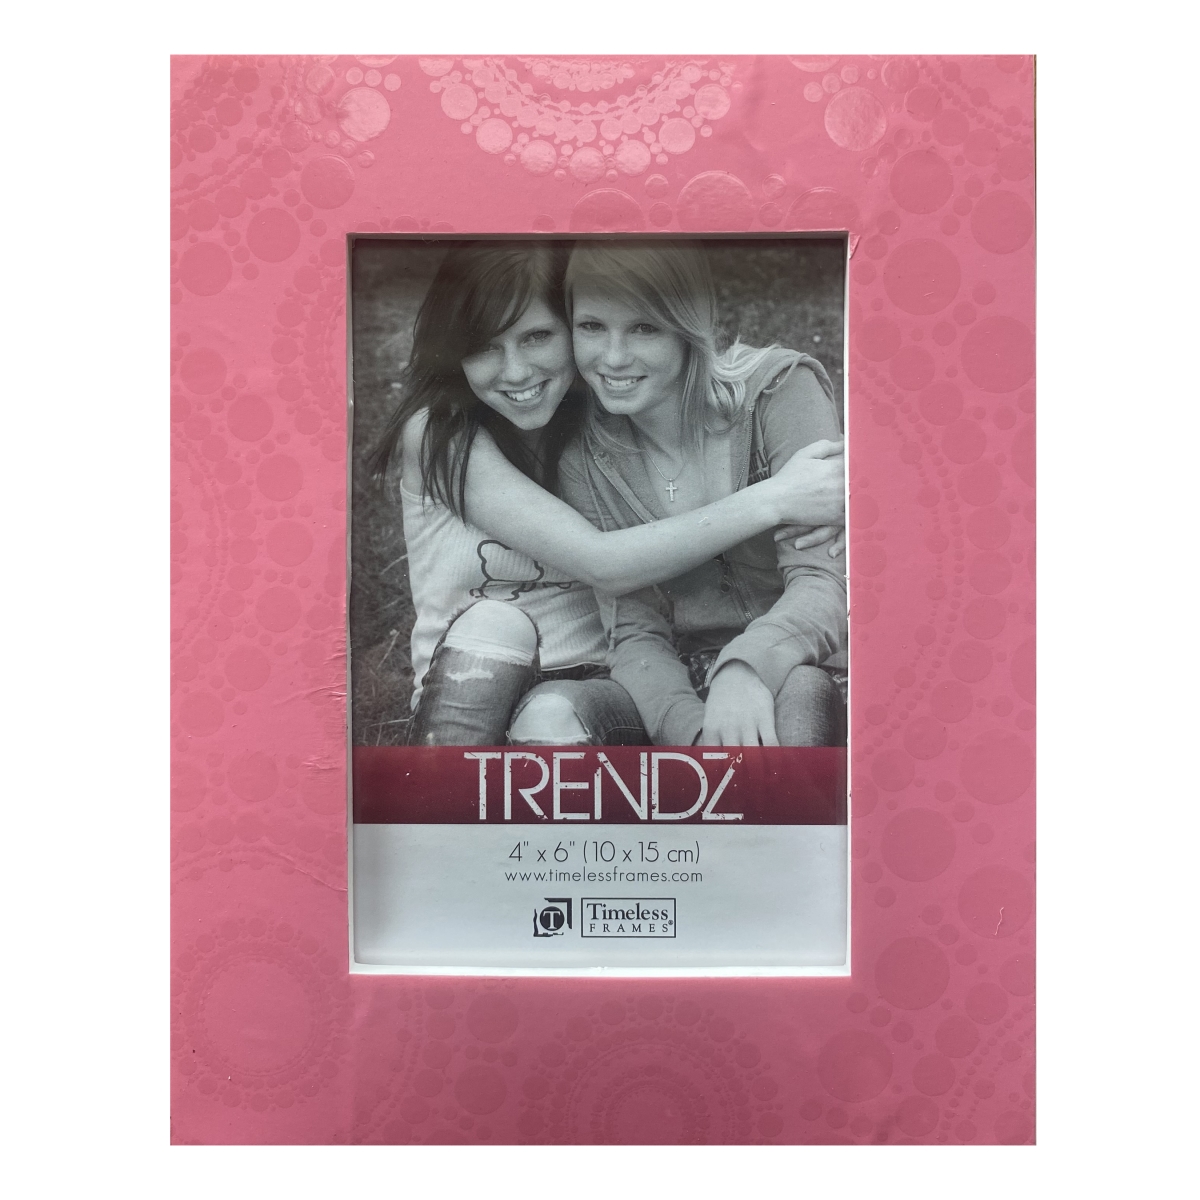 Picture of Timeless Frames 41644 Timeless Frames 41644 4x6 Pink Geometric Varnish picture frame